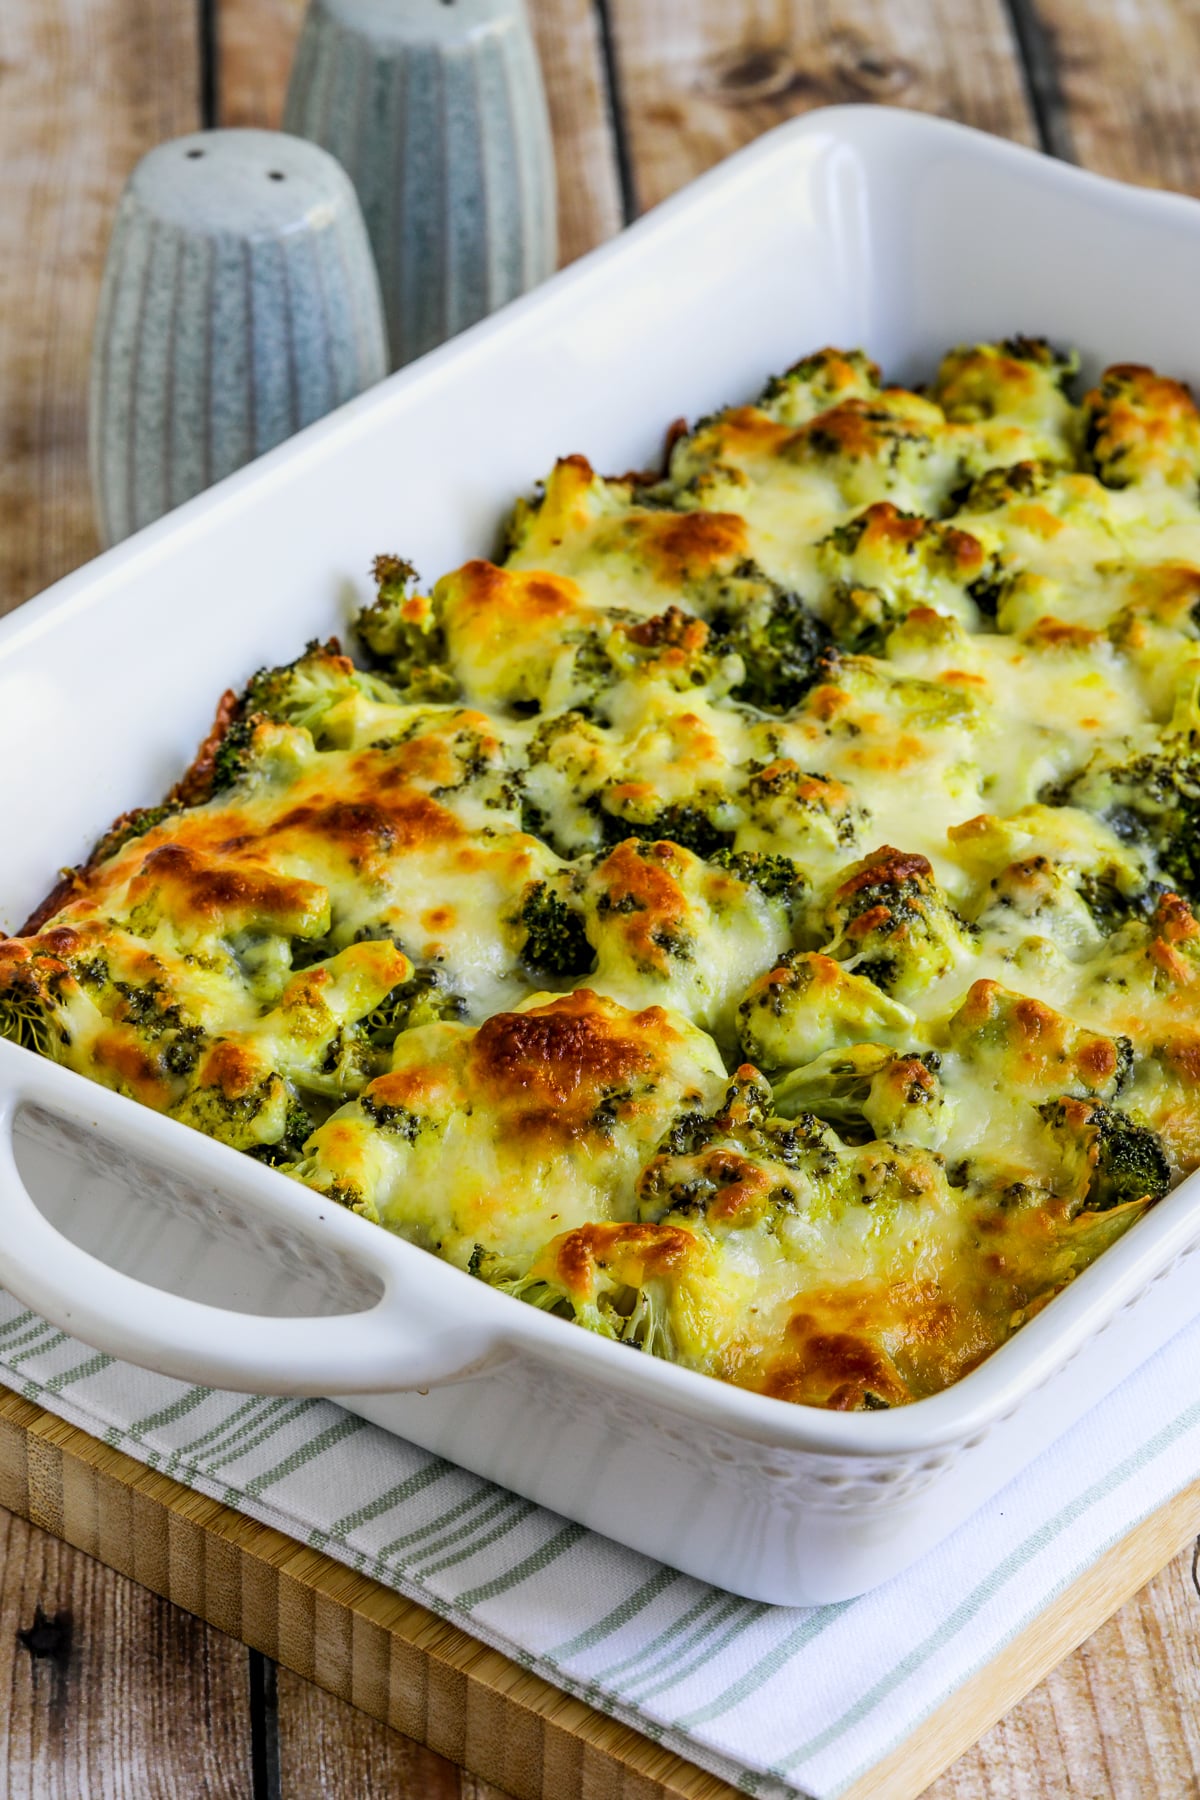 Broccoli Cauliflower Rice Casserole shown in baking dish with melted cheese.